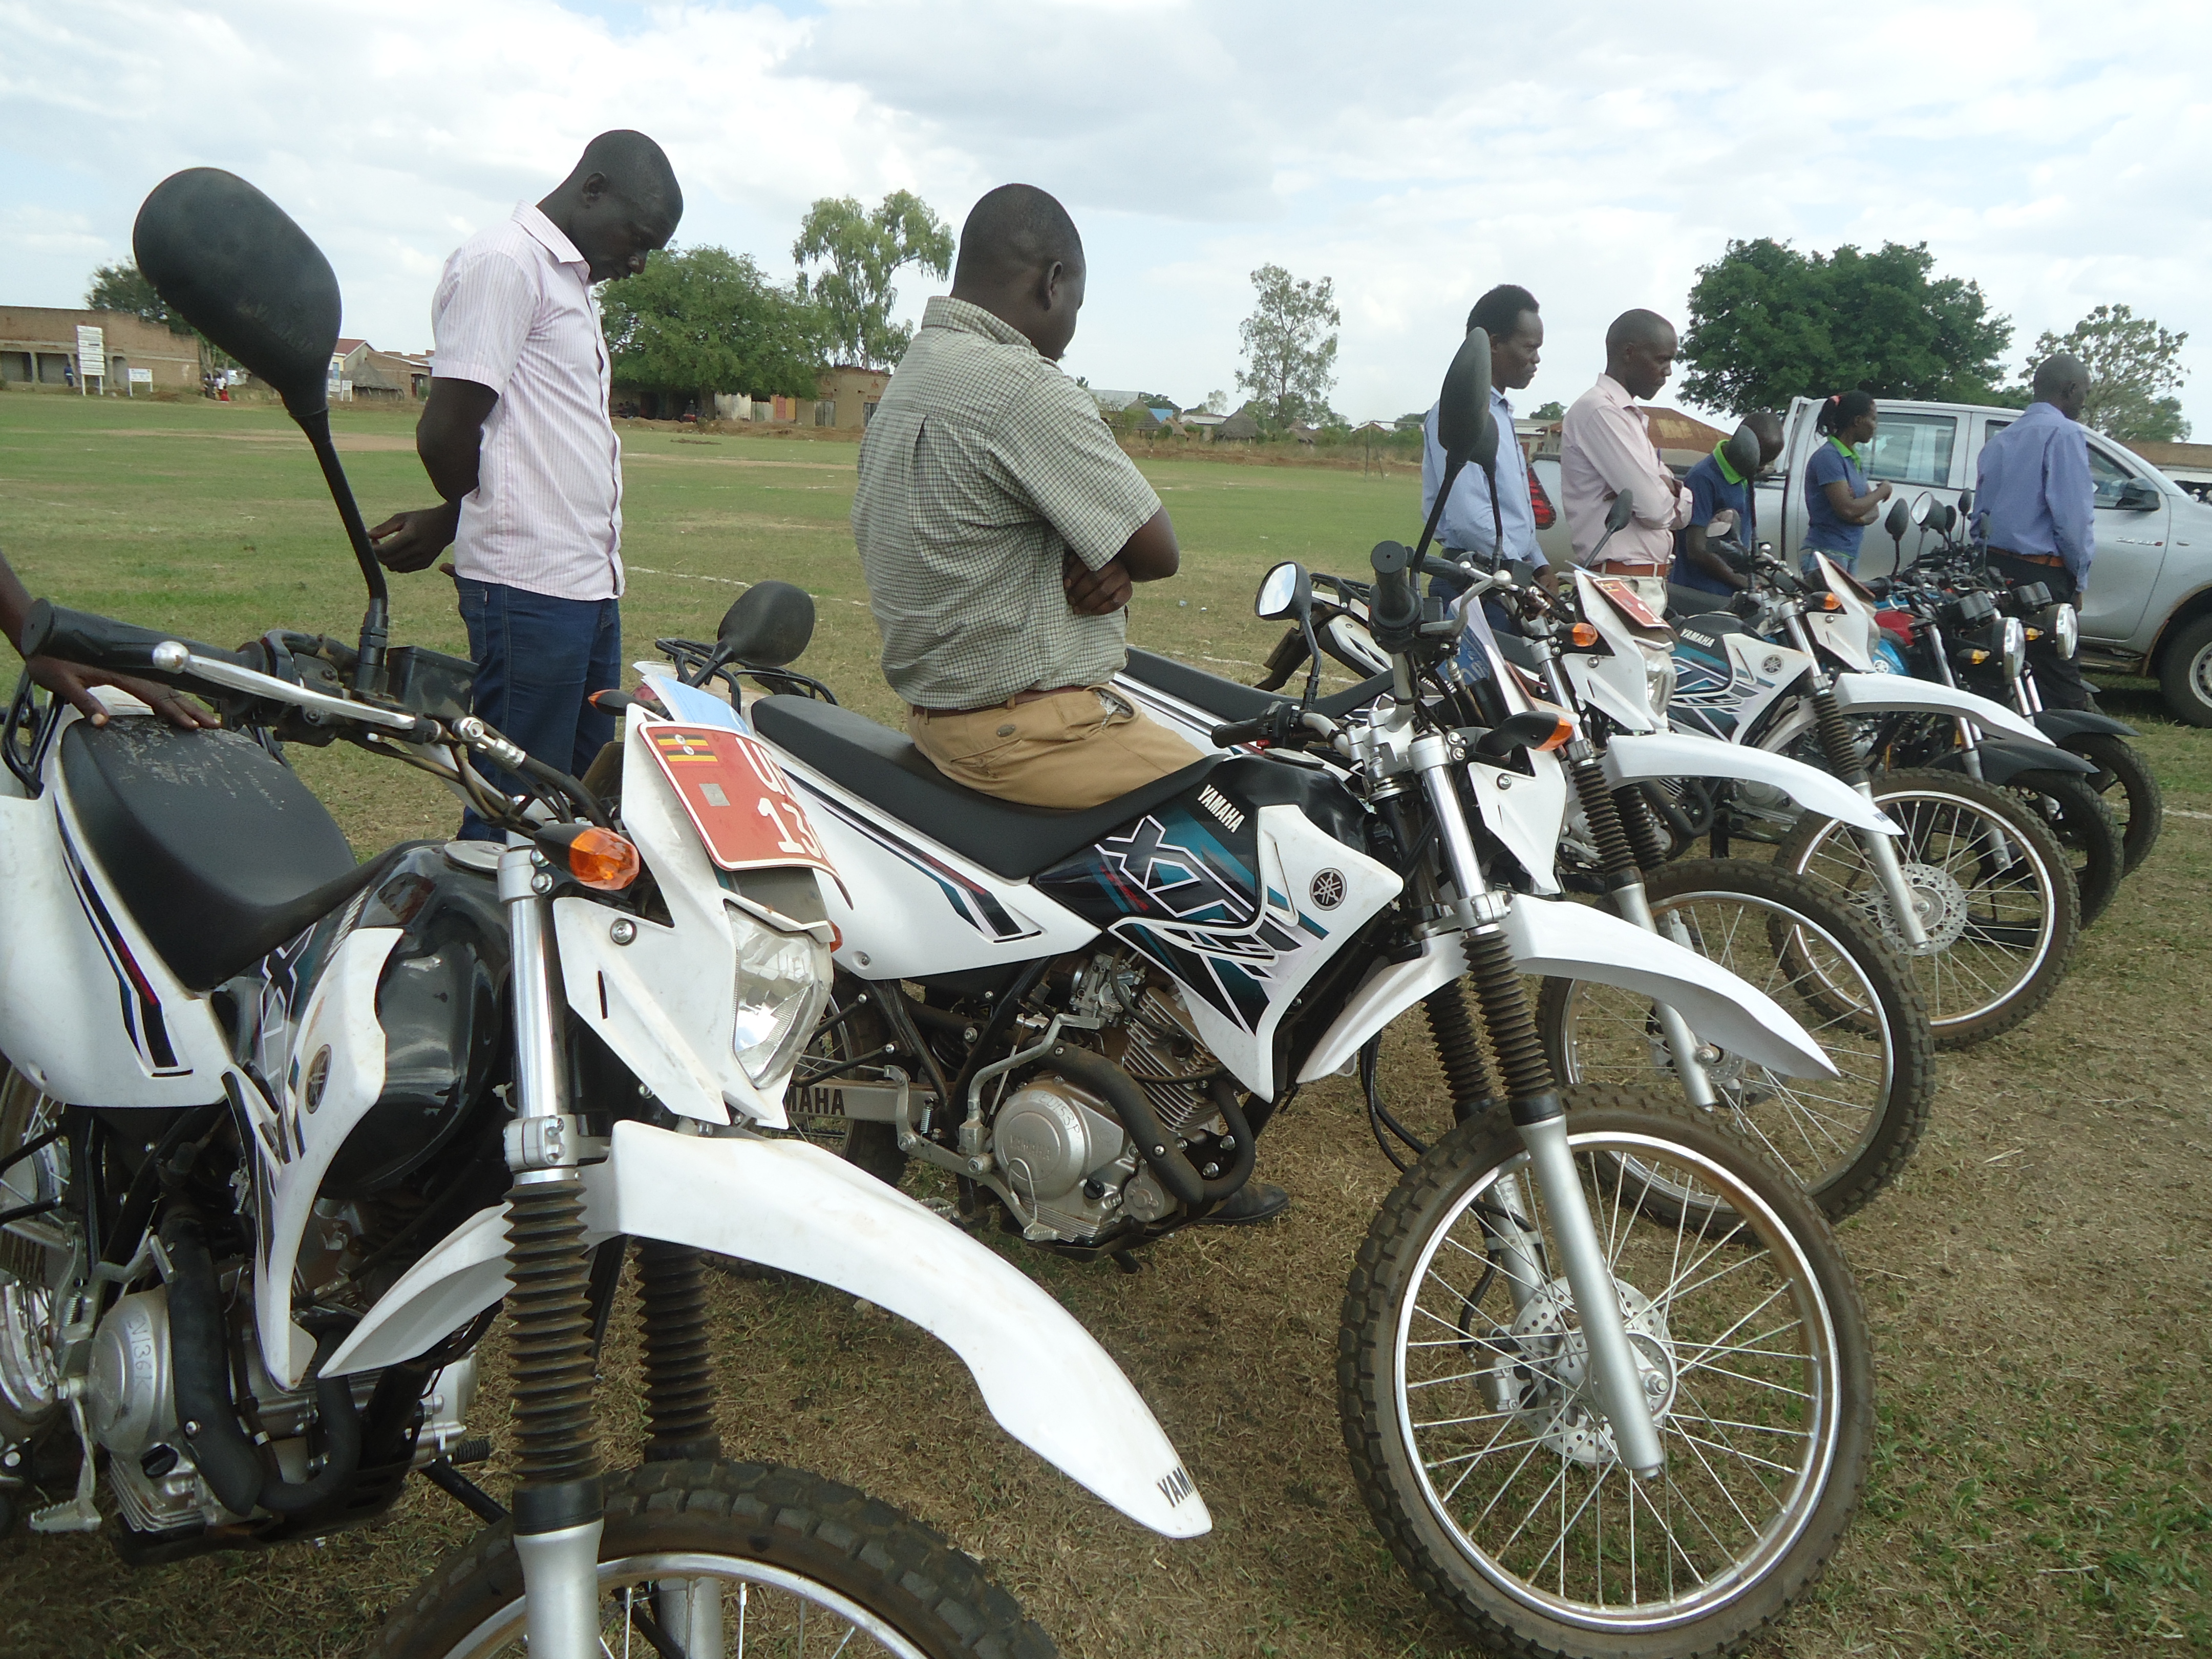 Some of the motorcycles that Kapelebyong received to improve service delivery